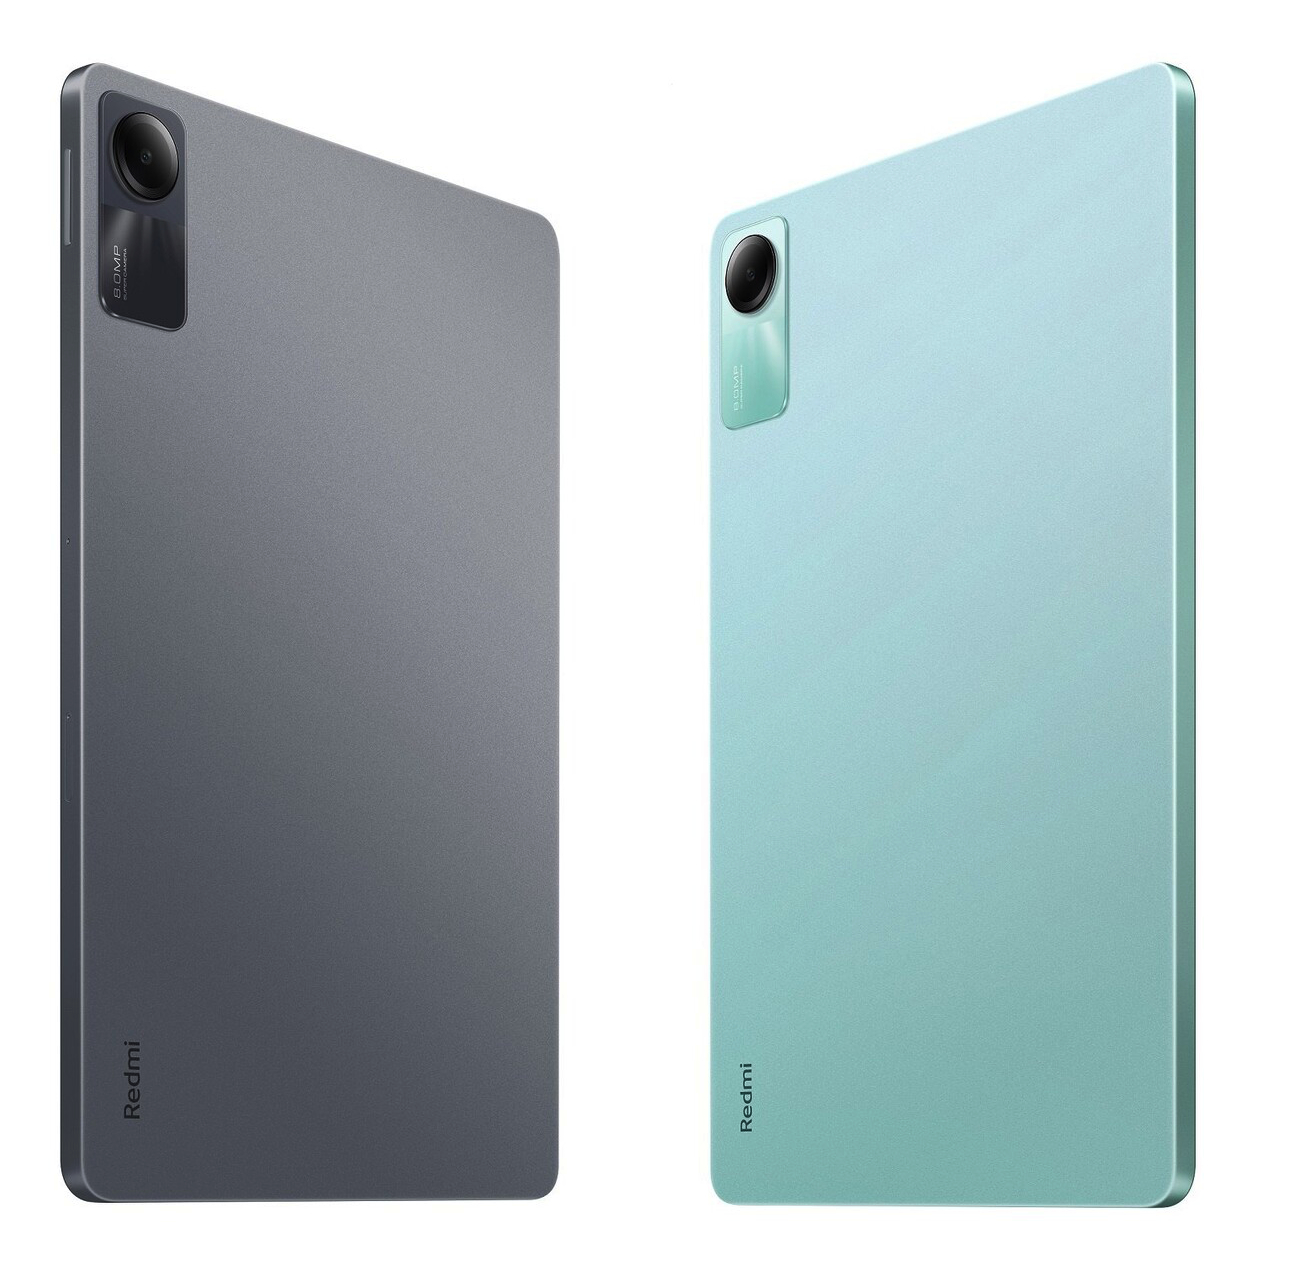 New Xiaomi Redmi Pad SE leak reveals price and more specifications